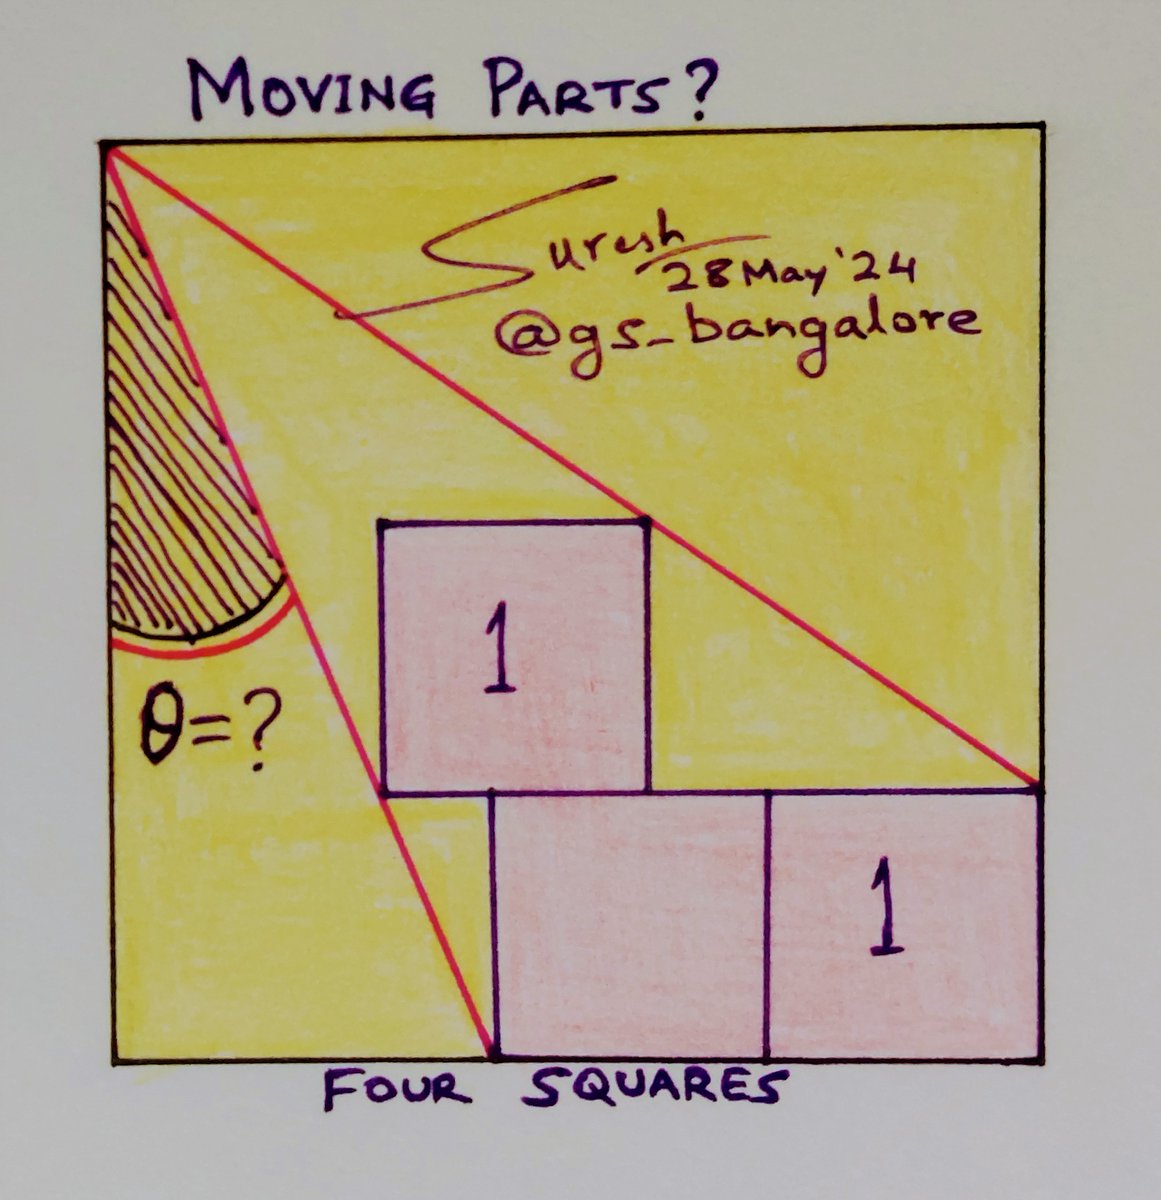 Moving Parts?

Four squares in a configuration. Angle theta = ?

#square #triangle #geometry #geometrique #angle #puzzle #competition #thinking #logic #reasoning #today #riddle #test #mathteachers #math #teacher #mathematics #mathisfun #Algebra #highschool #students #learning